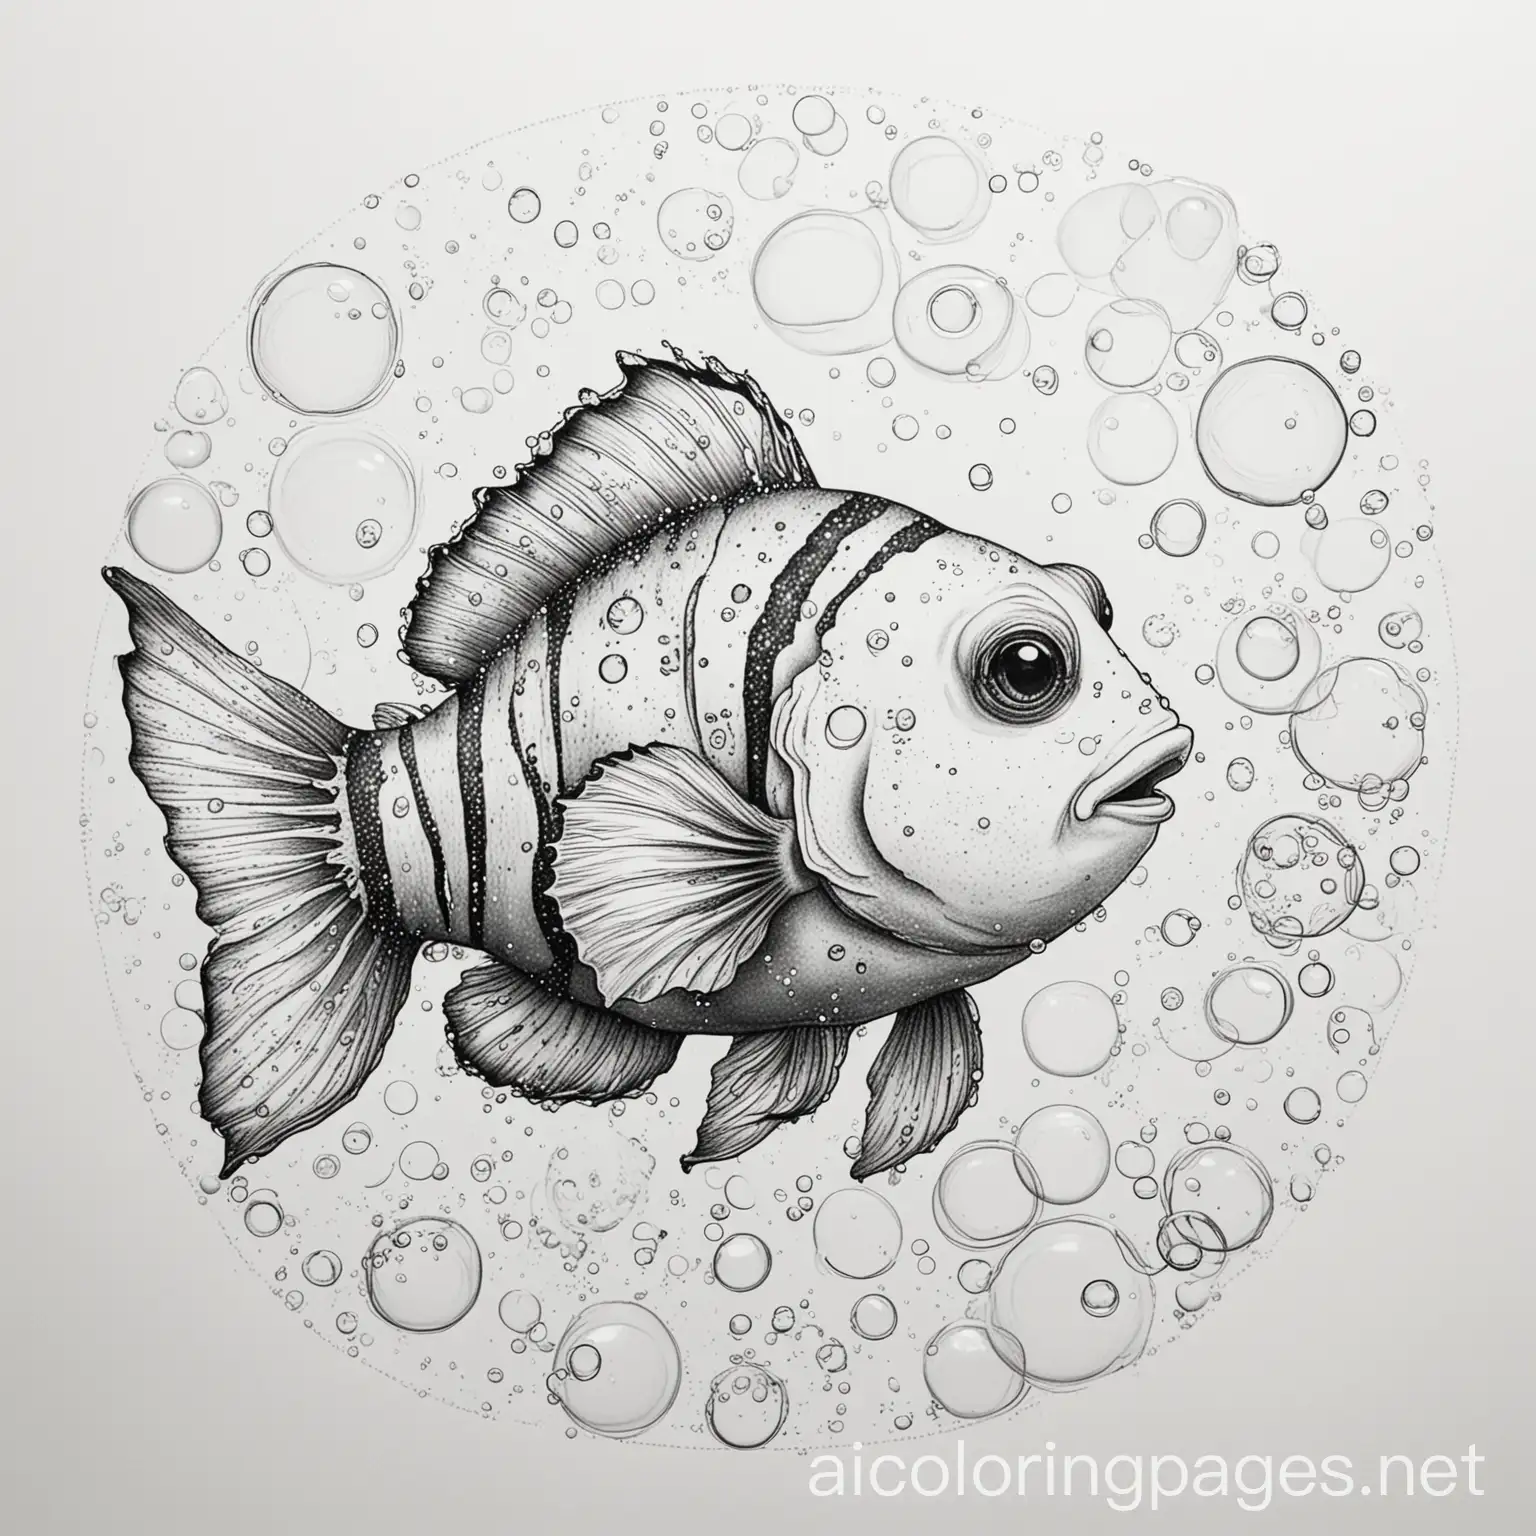 clown fish with bubbles and a mermaid, Coloring Page, black and white, line art, white background, Simplicity, Ample White Space